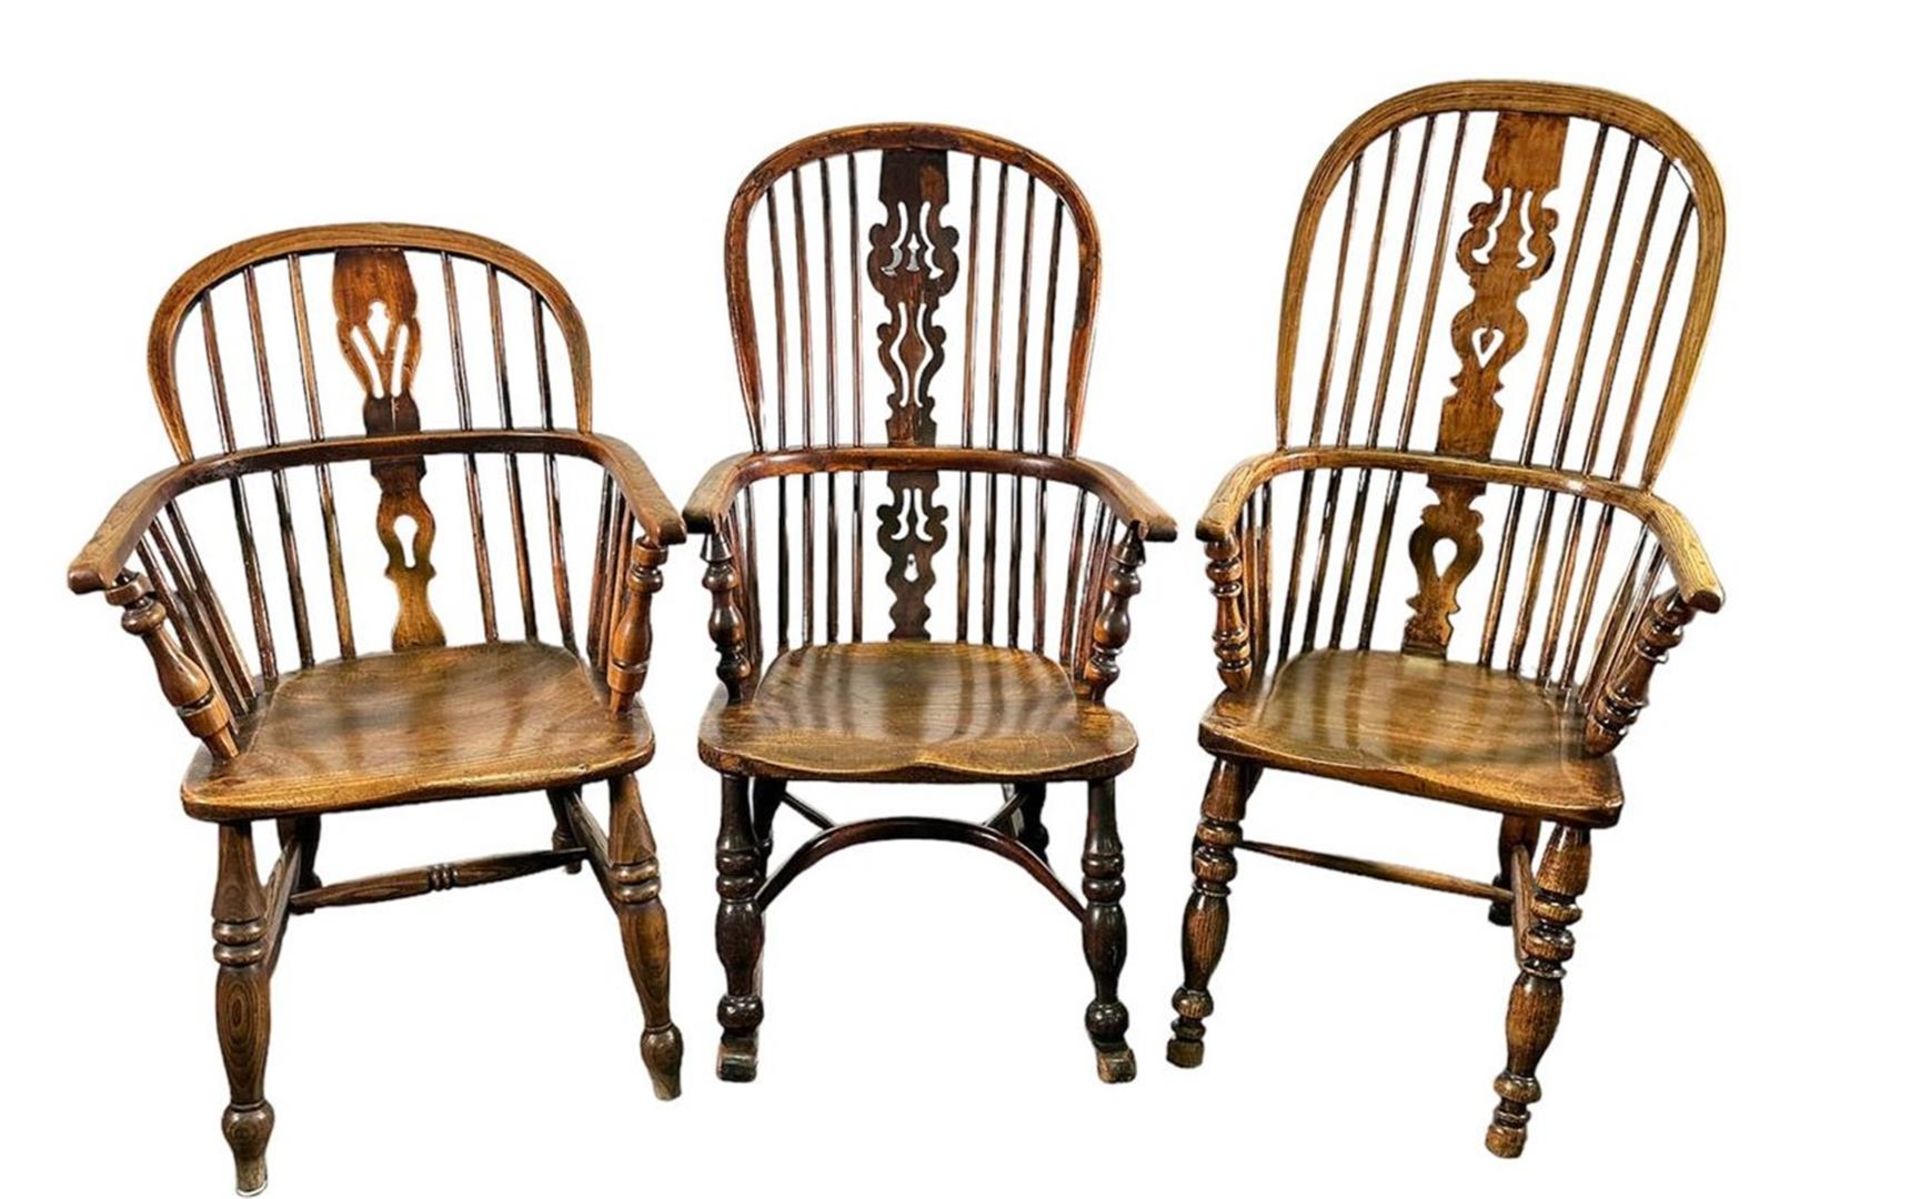 One of (3) so-called Windsor chairs rocking chair, England, 19th century.